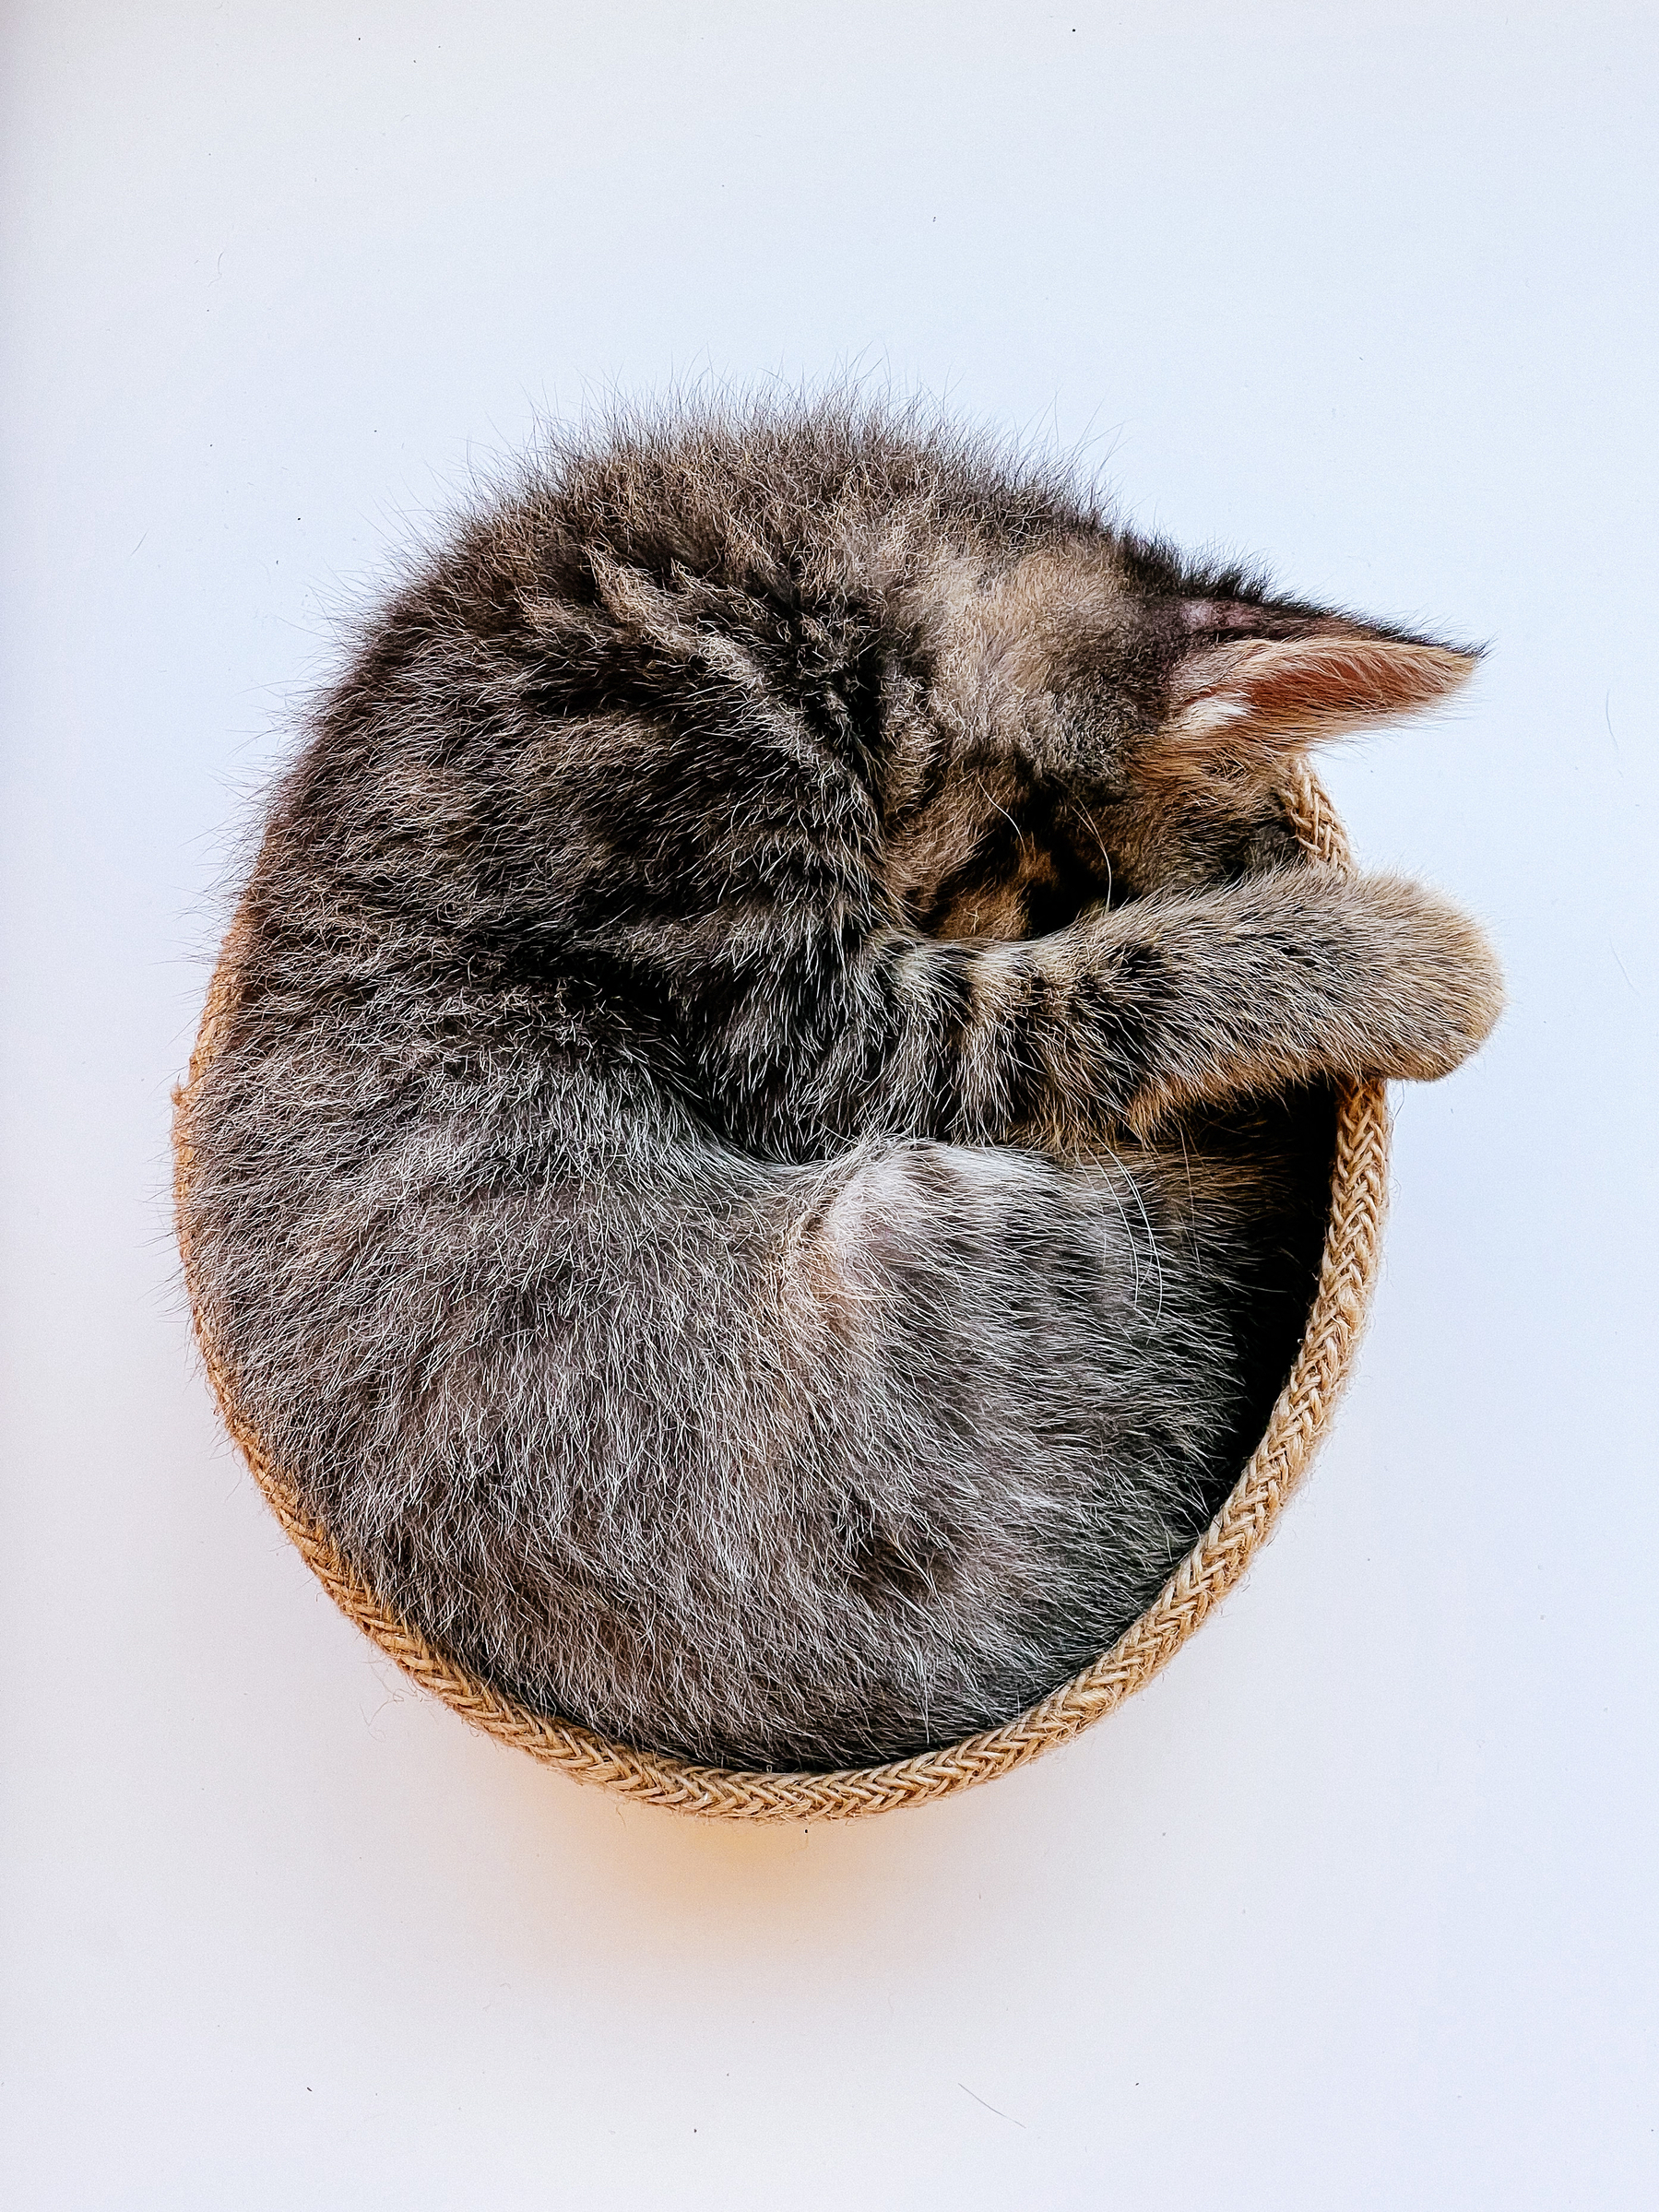 cat curled up, sleeping